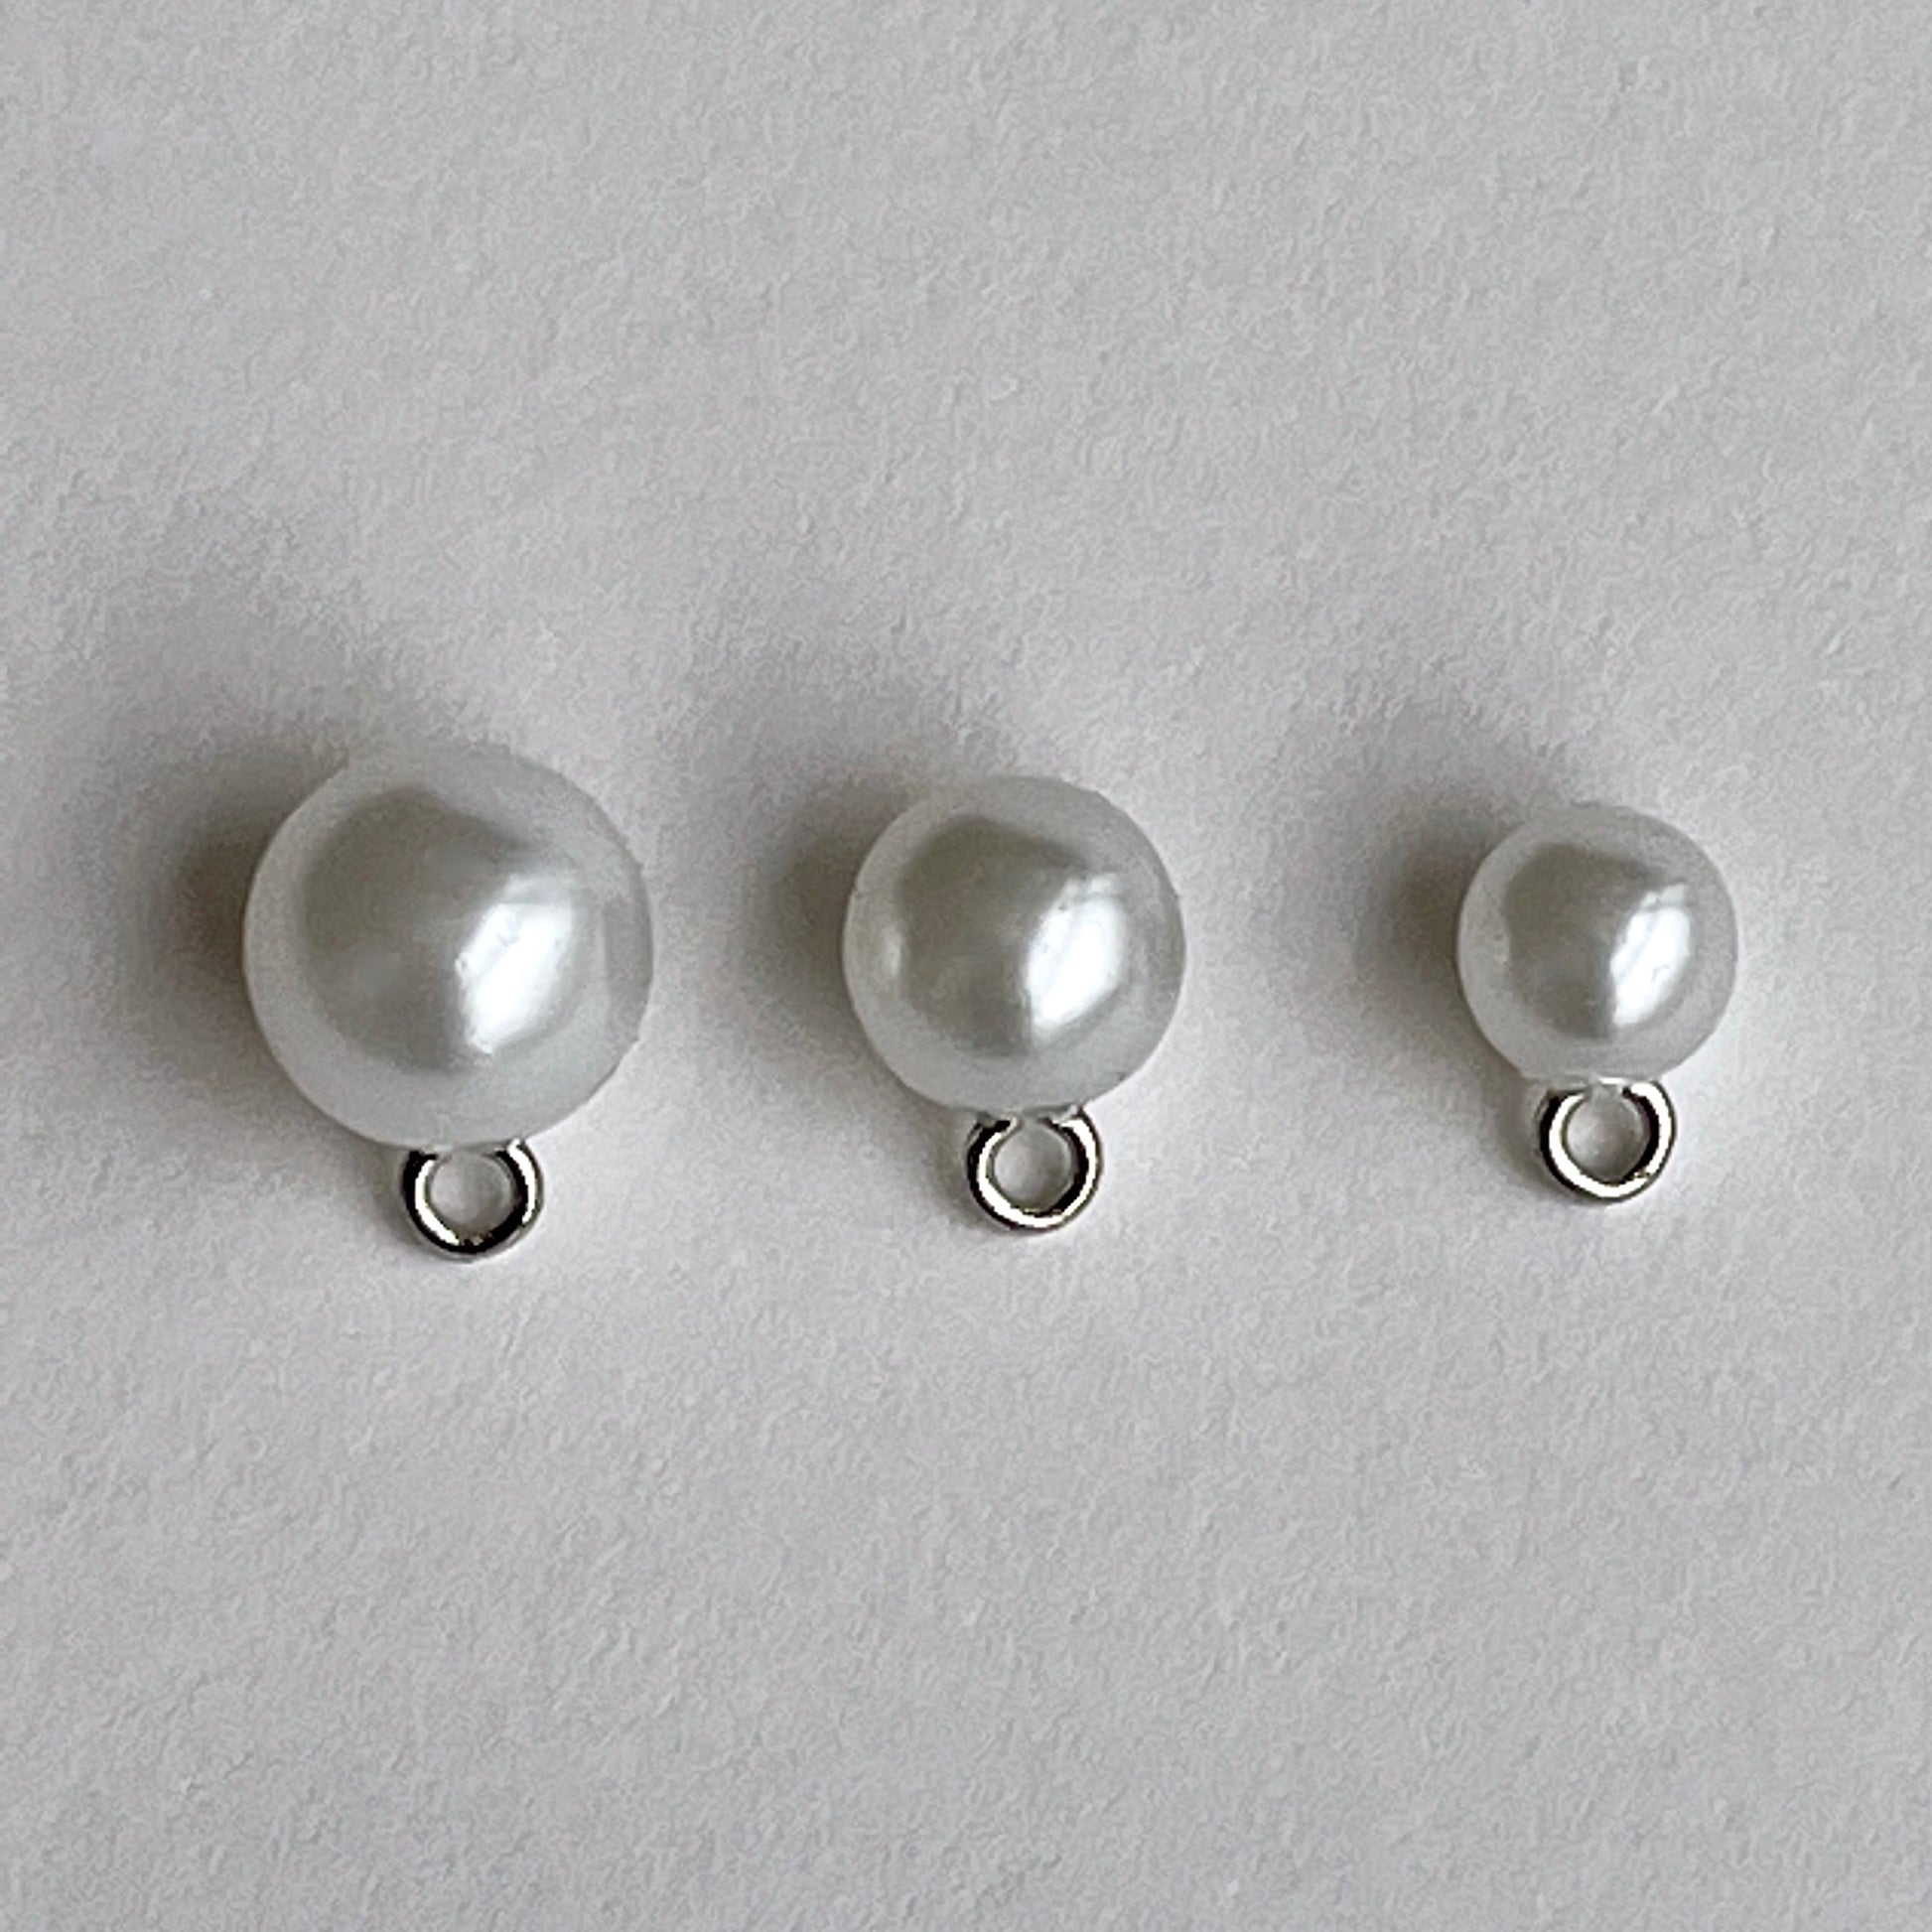 White Pearl bridal ball buttons with metal shank perfect for bridal wear, baptism and Christening gowns or even a fancy cardi! Available in either white or ivory and 3 sizes. Close up image of 3 sizes of faux pearl buttons.